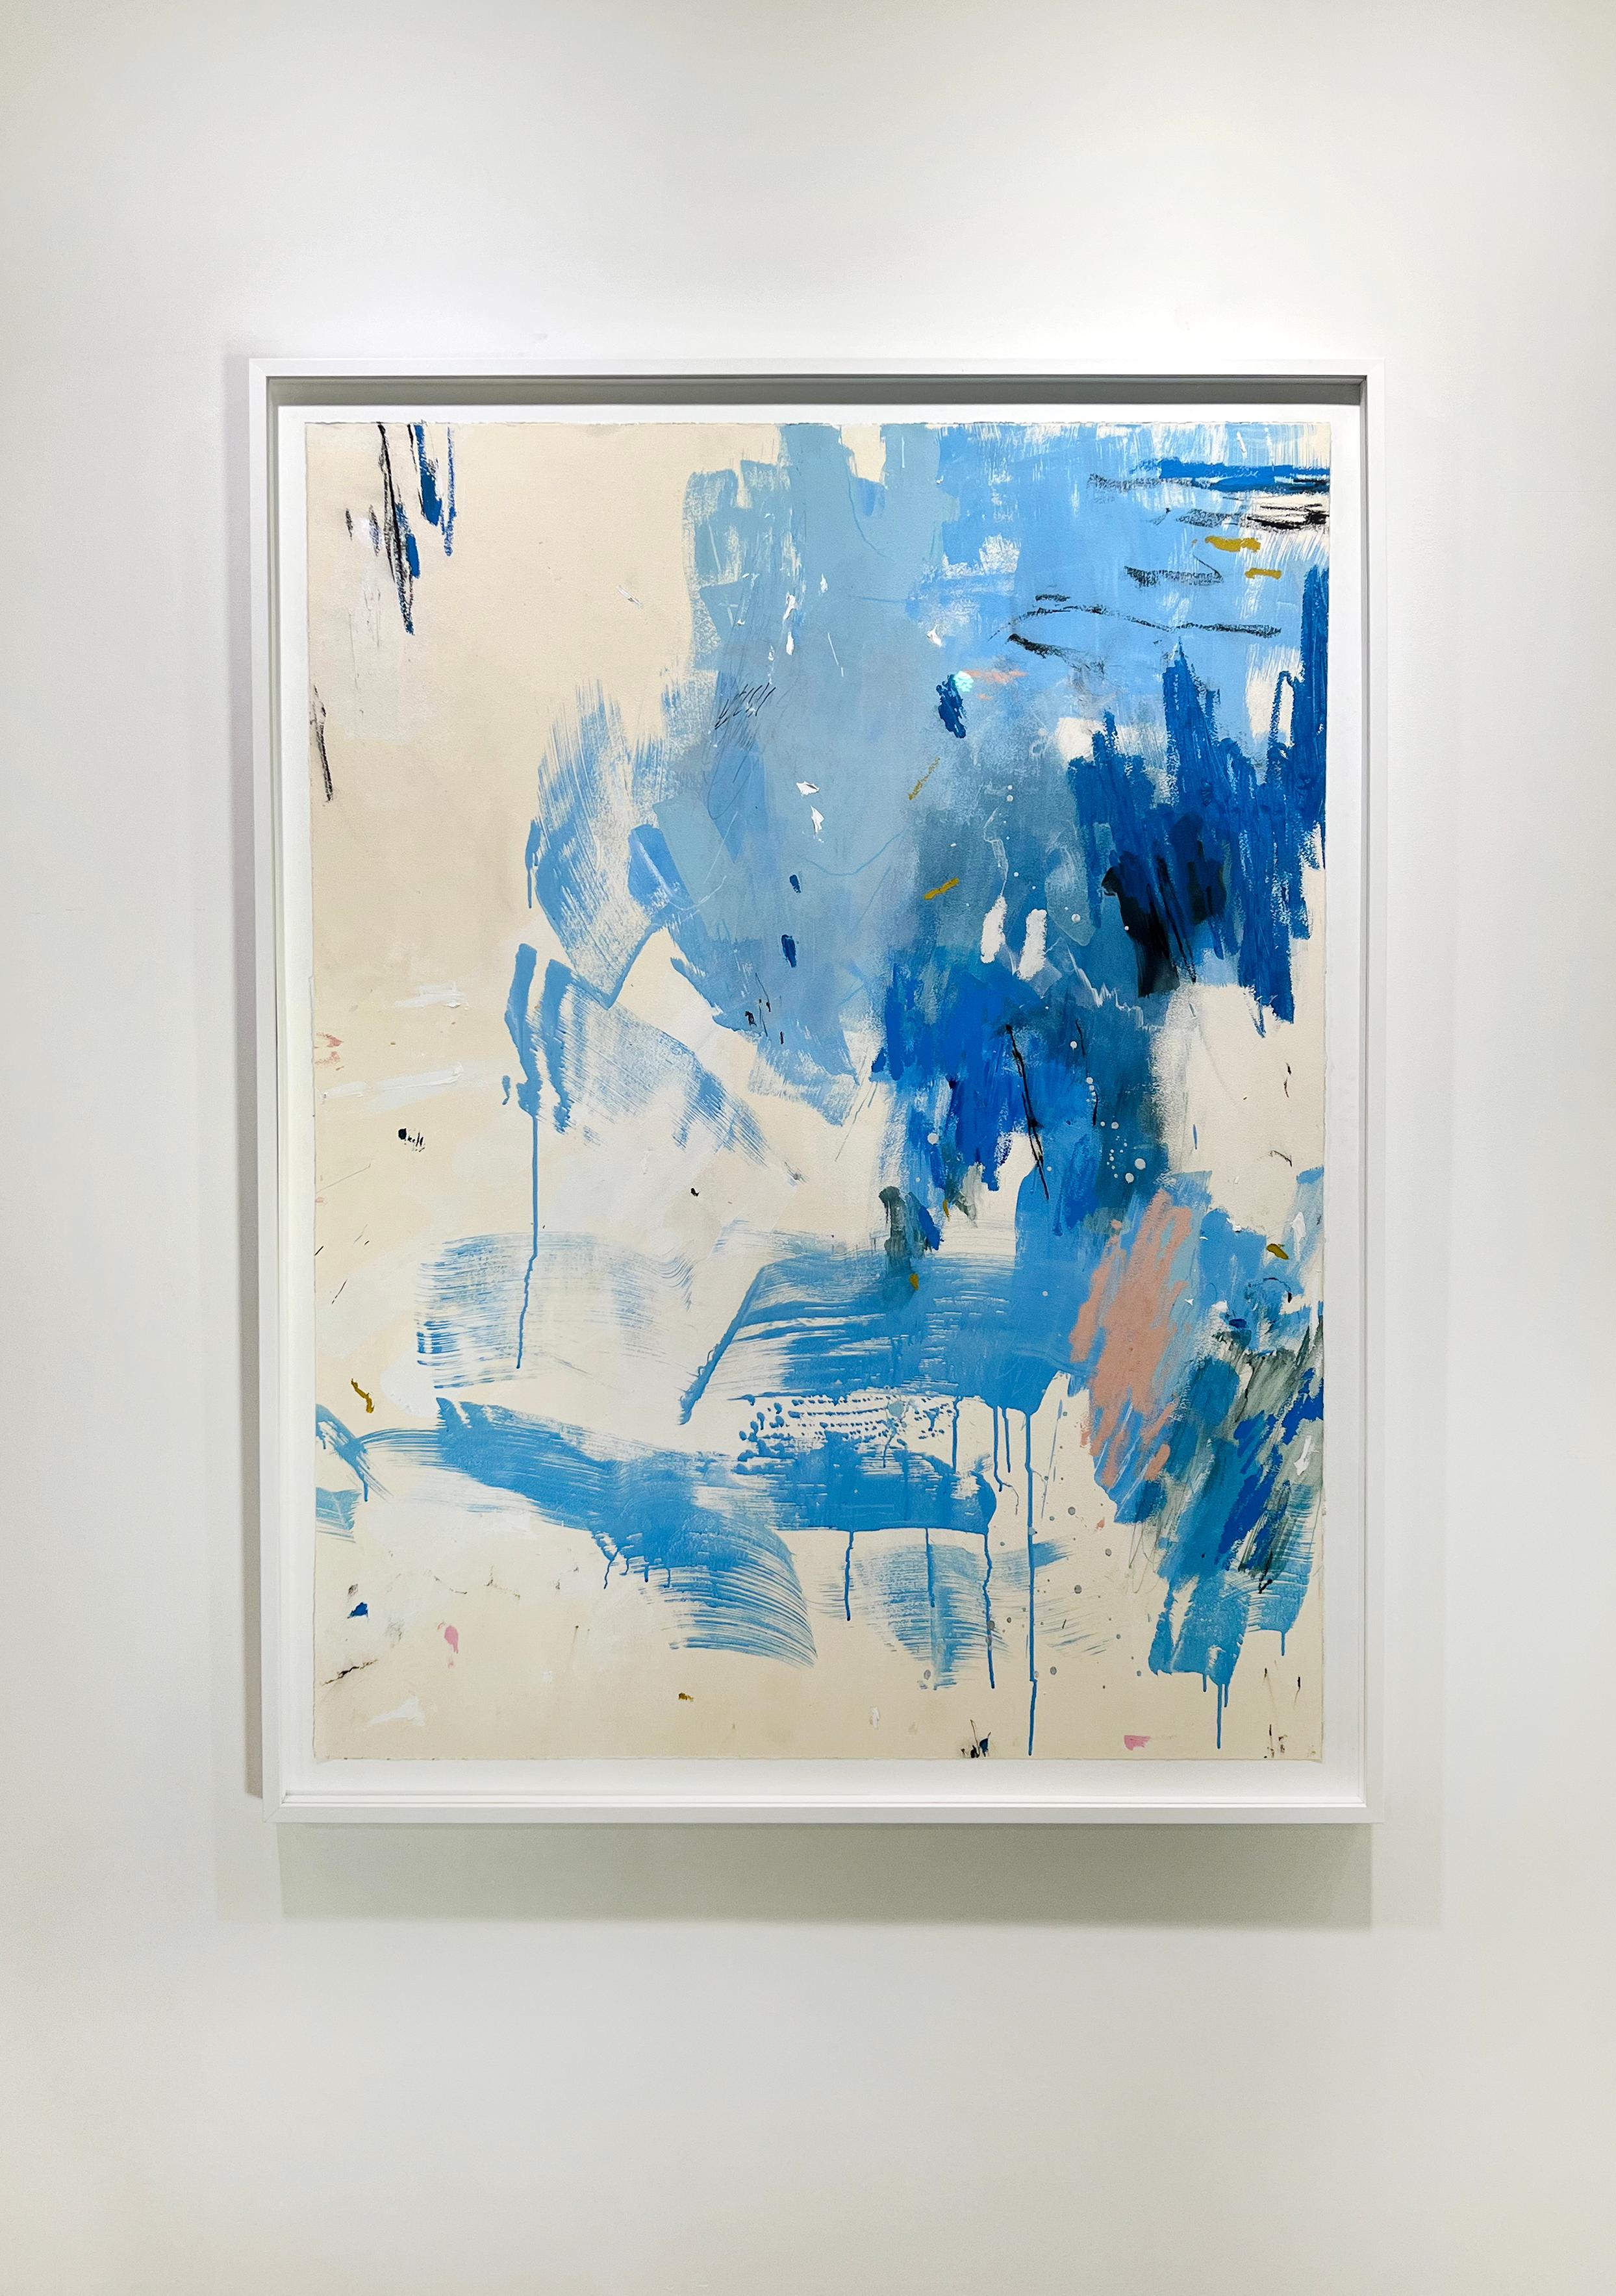 This original framed abstract painting on paper by Kelly Rossetti features a cool blue palette. Expressive strokes and drips of varying blue tones are contrasted by smaller warm dabs of paint as well as an off-white background. The painting itself